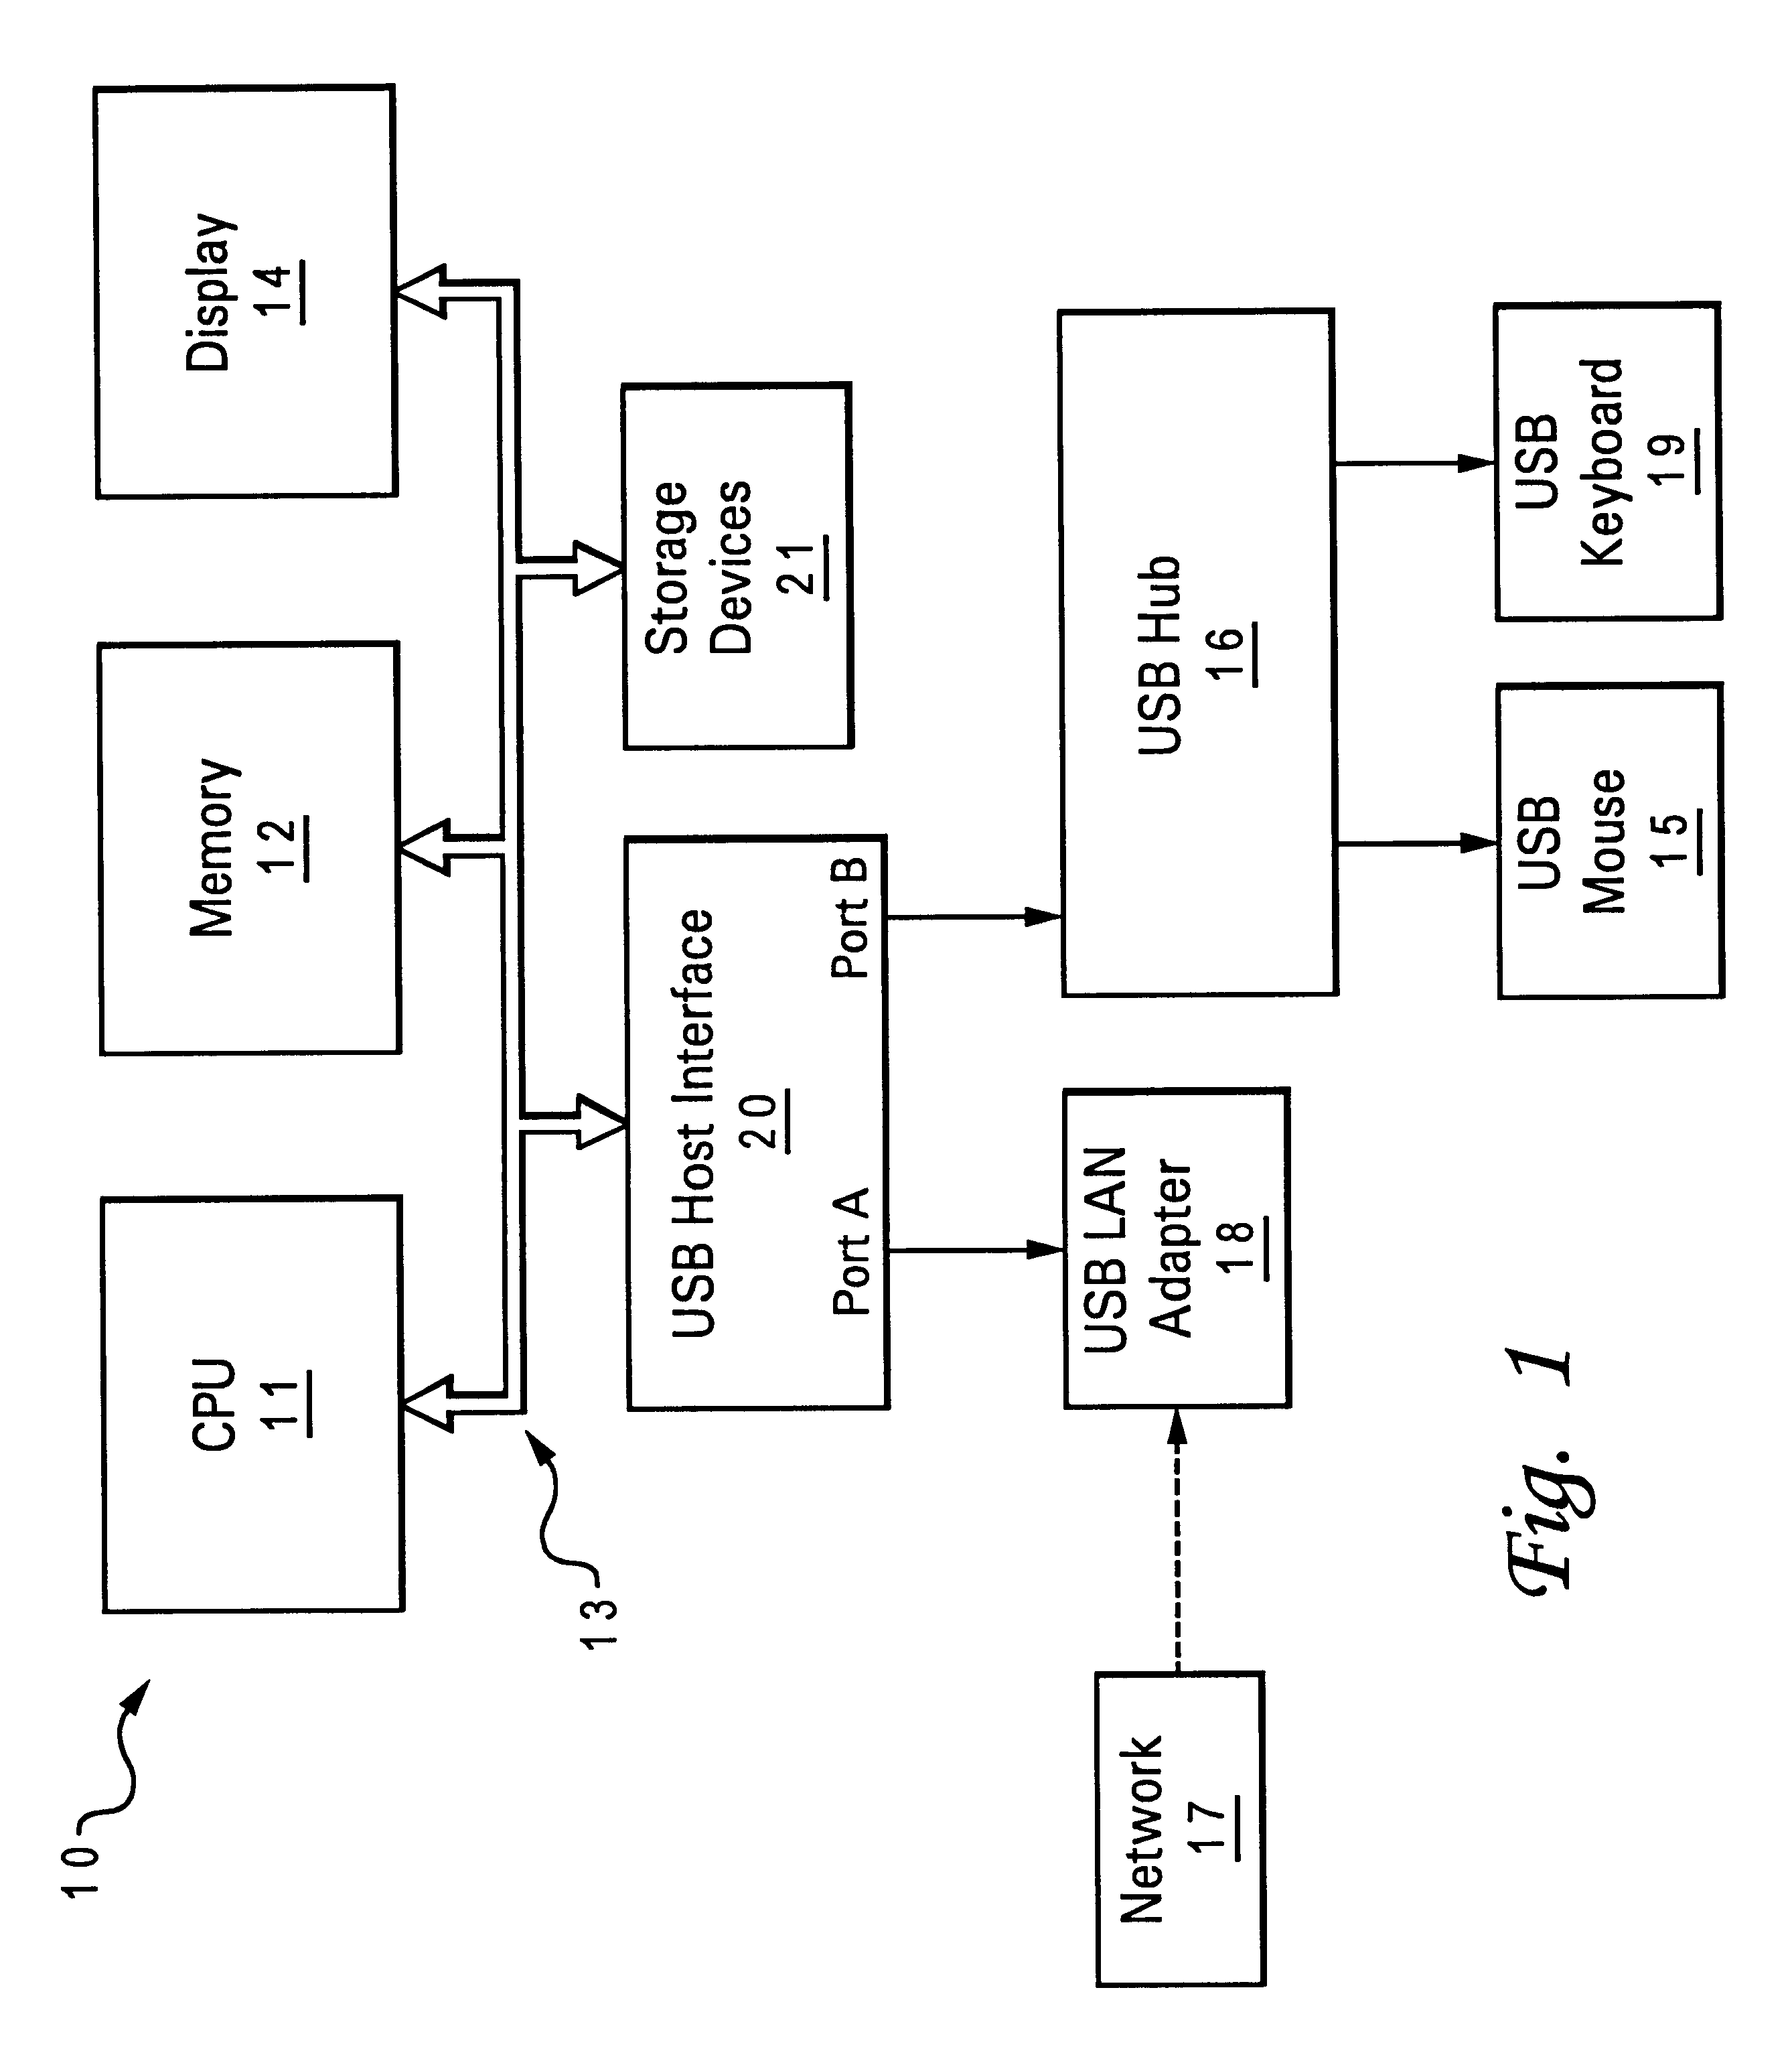 Method and apparatus for activating a computer system in response to a stimulus from a universal serial bus peripheral